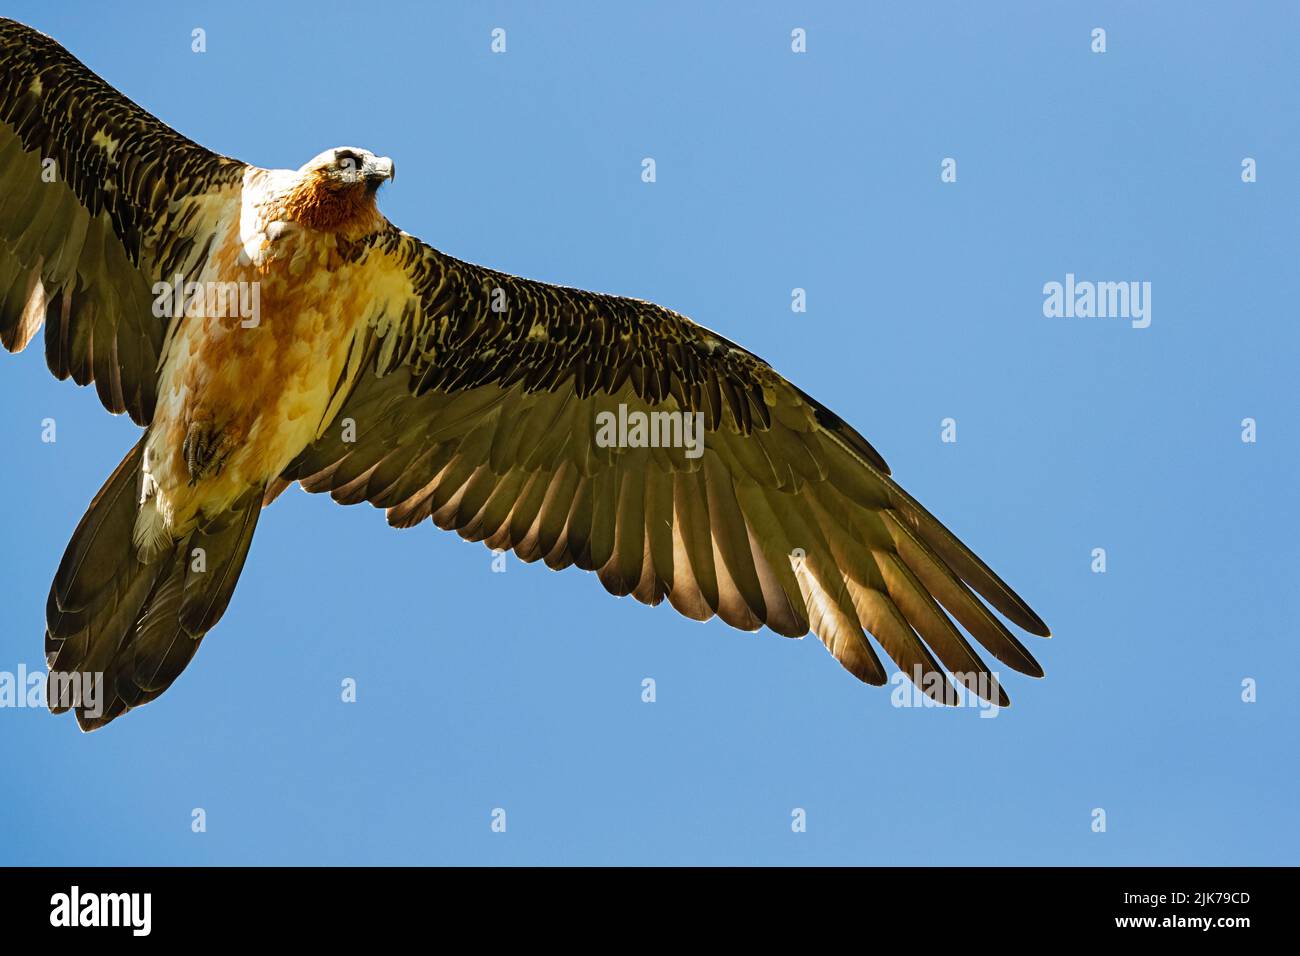 An adult Bearded Vultures or Lammergeier (Gypaetus barbatus) circeling at the blue sky above the photographer Stock Photo